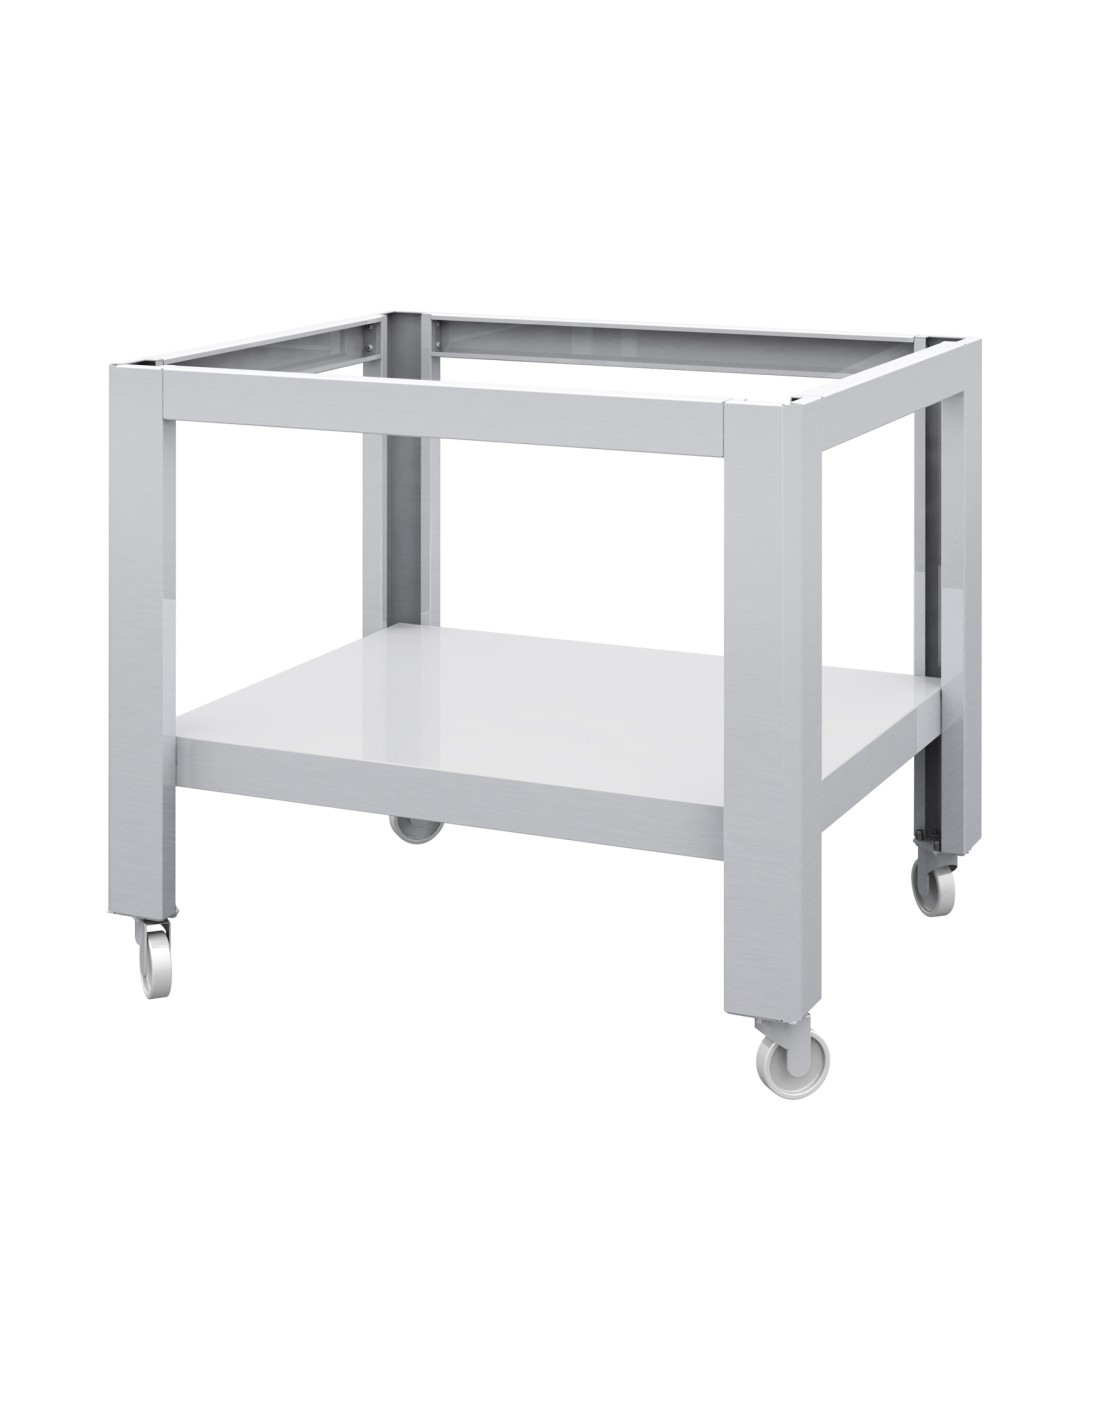 Support in stainless steel - Dimensions cm 110 x 128 x 99 h